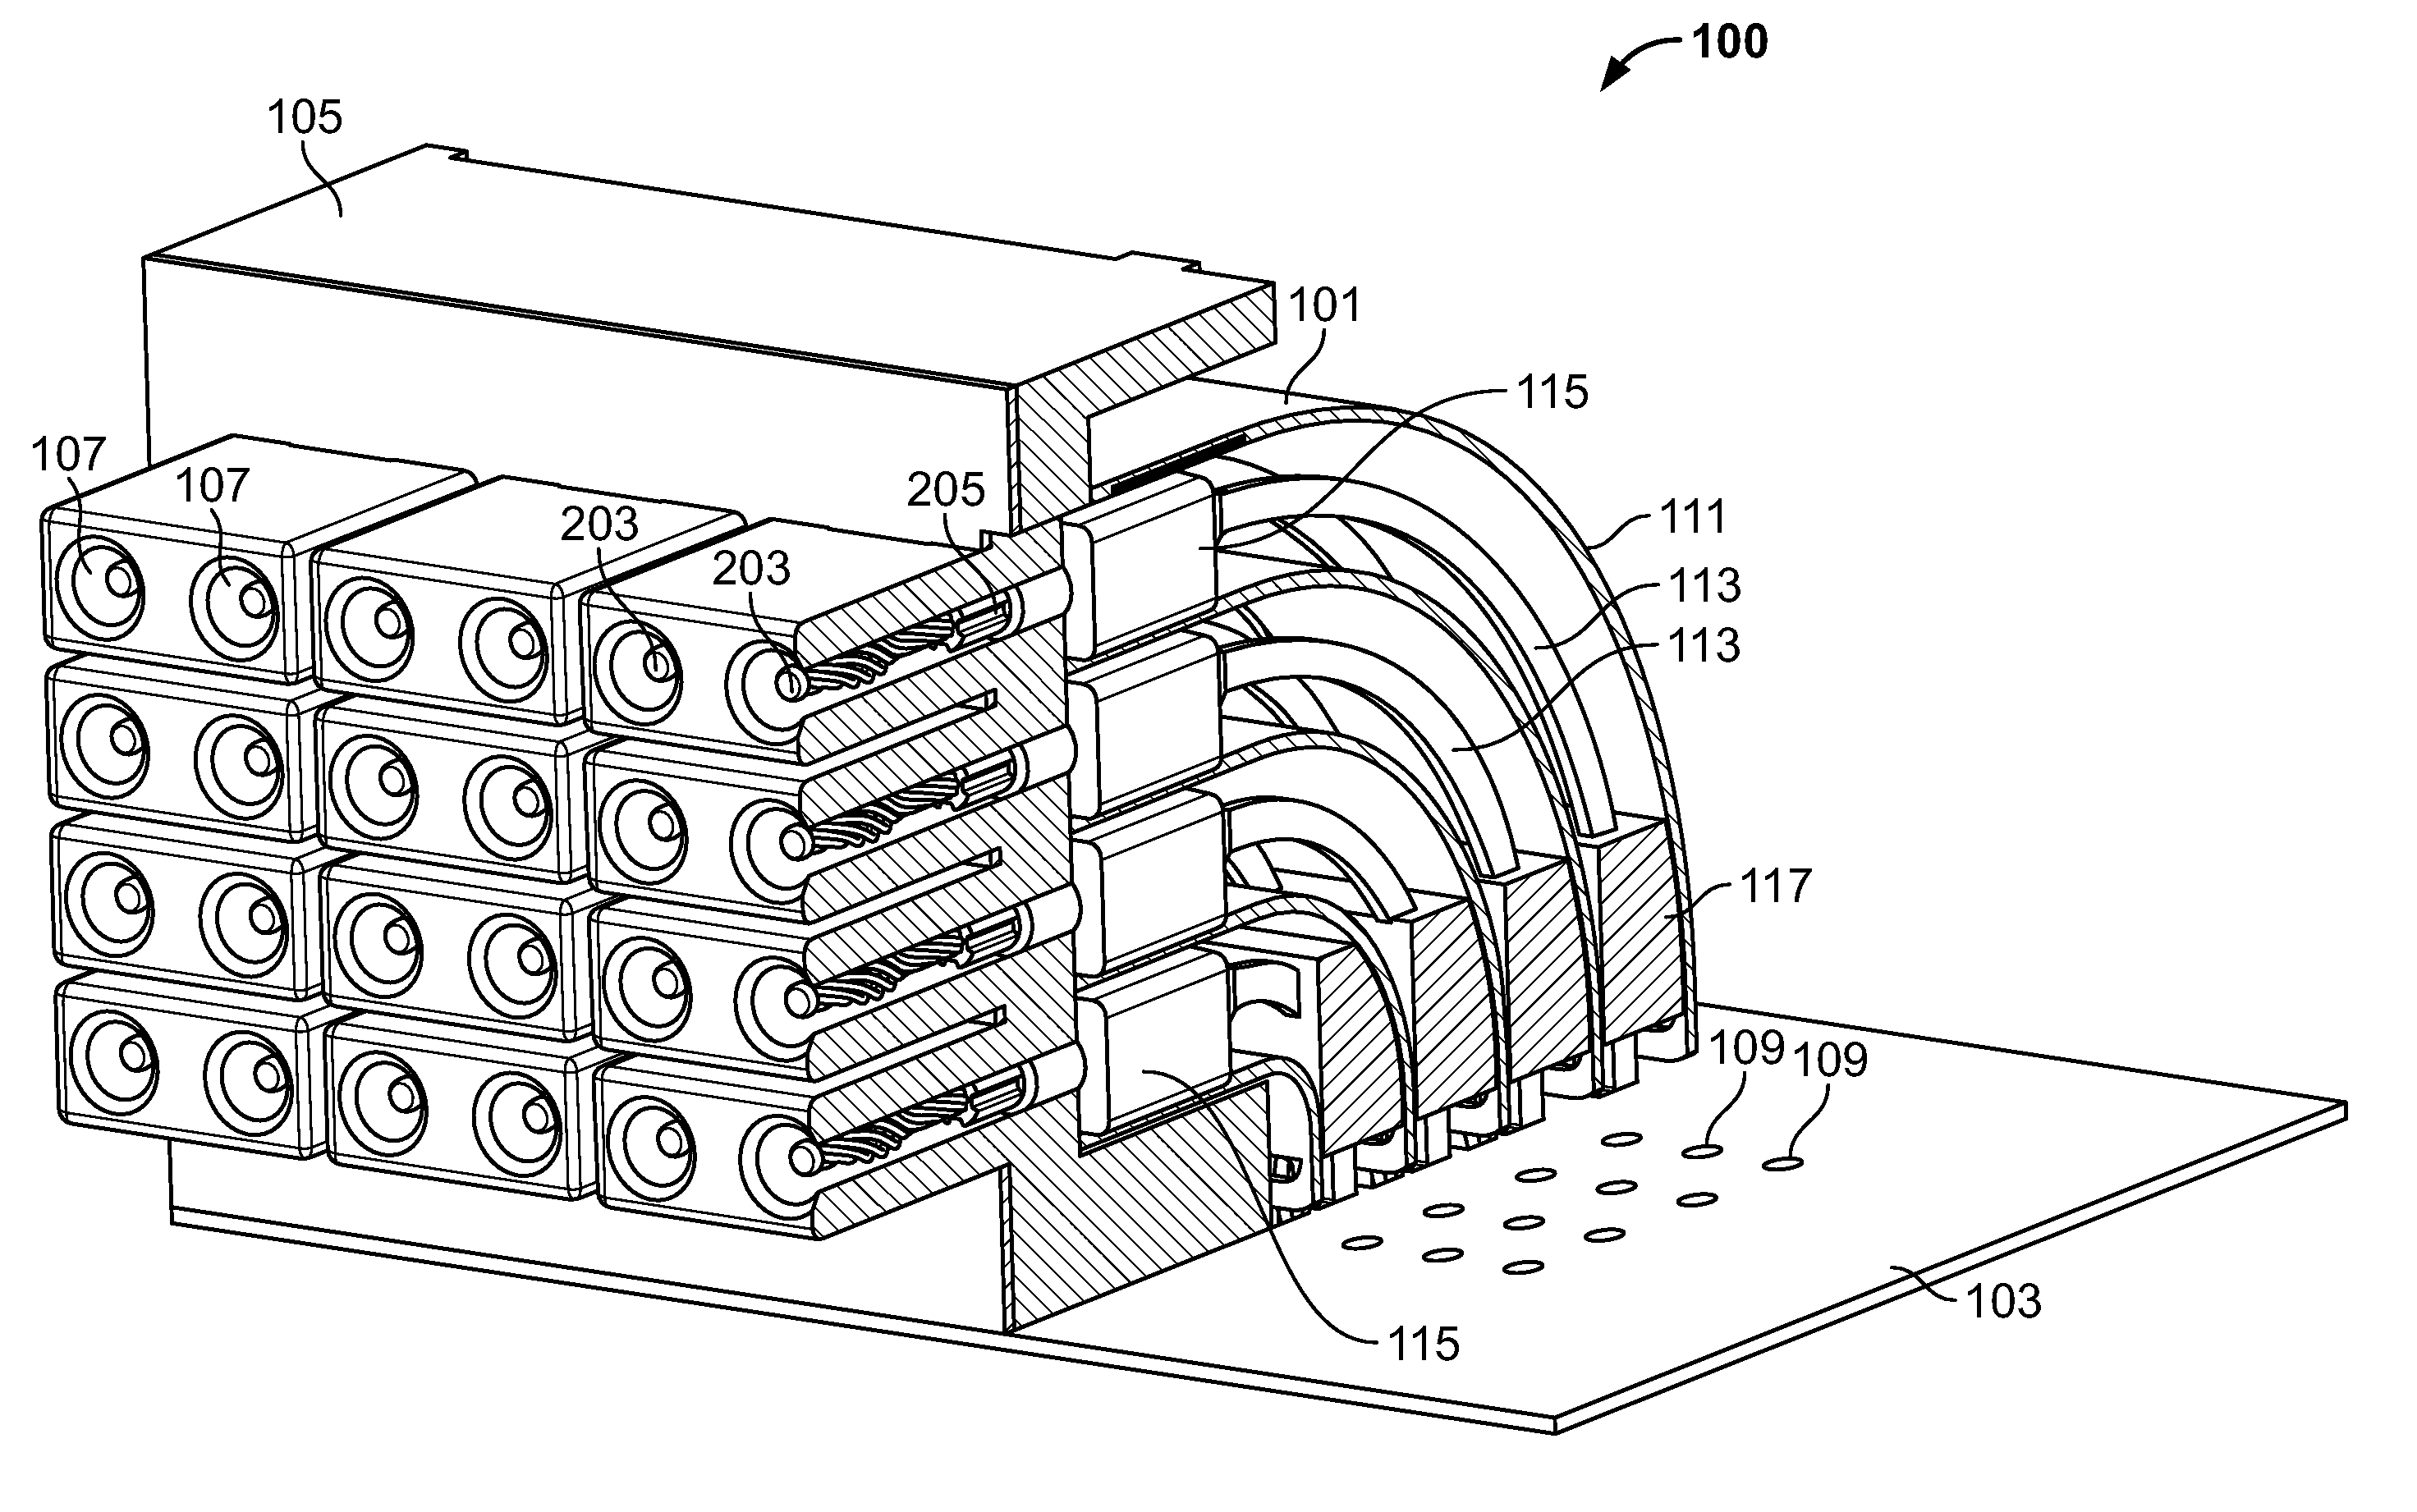 High-speed backplane connector